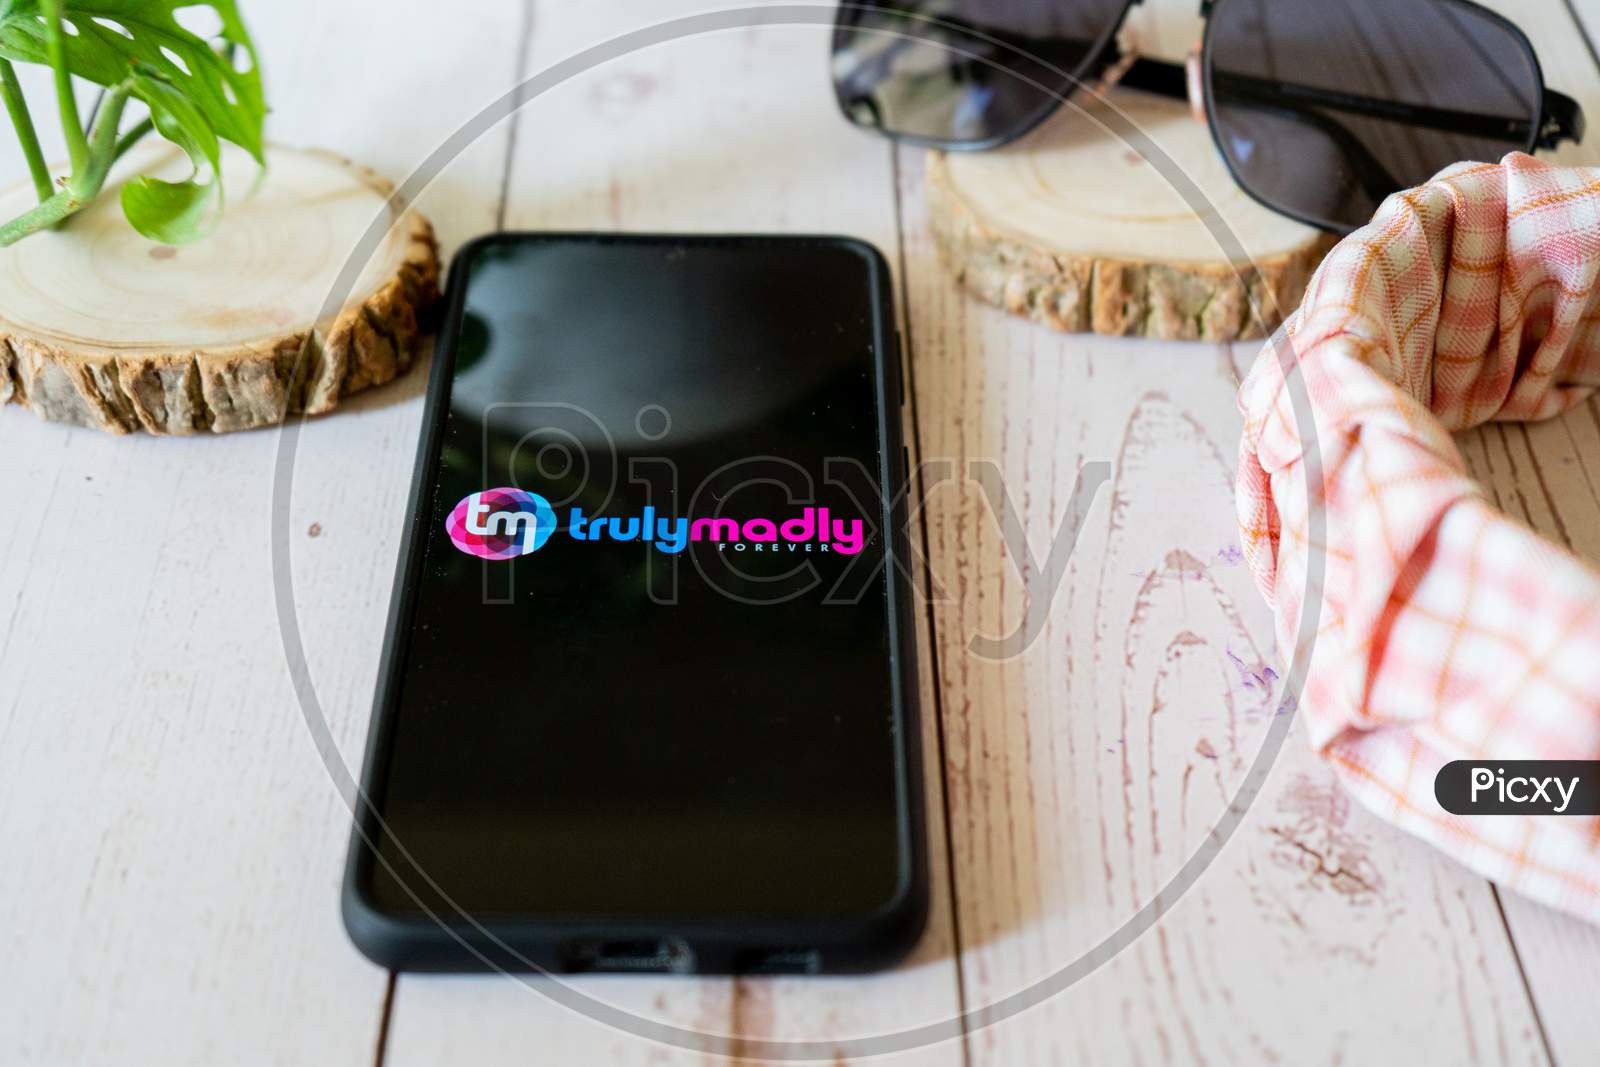 Indian Starup Unicorn Matchmaking App Trulymadly Which Has Recently Received Funding And Is Helping Young Singles Meet Each Other Online For Dating Marriage And More